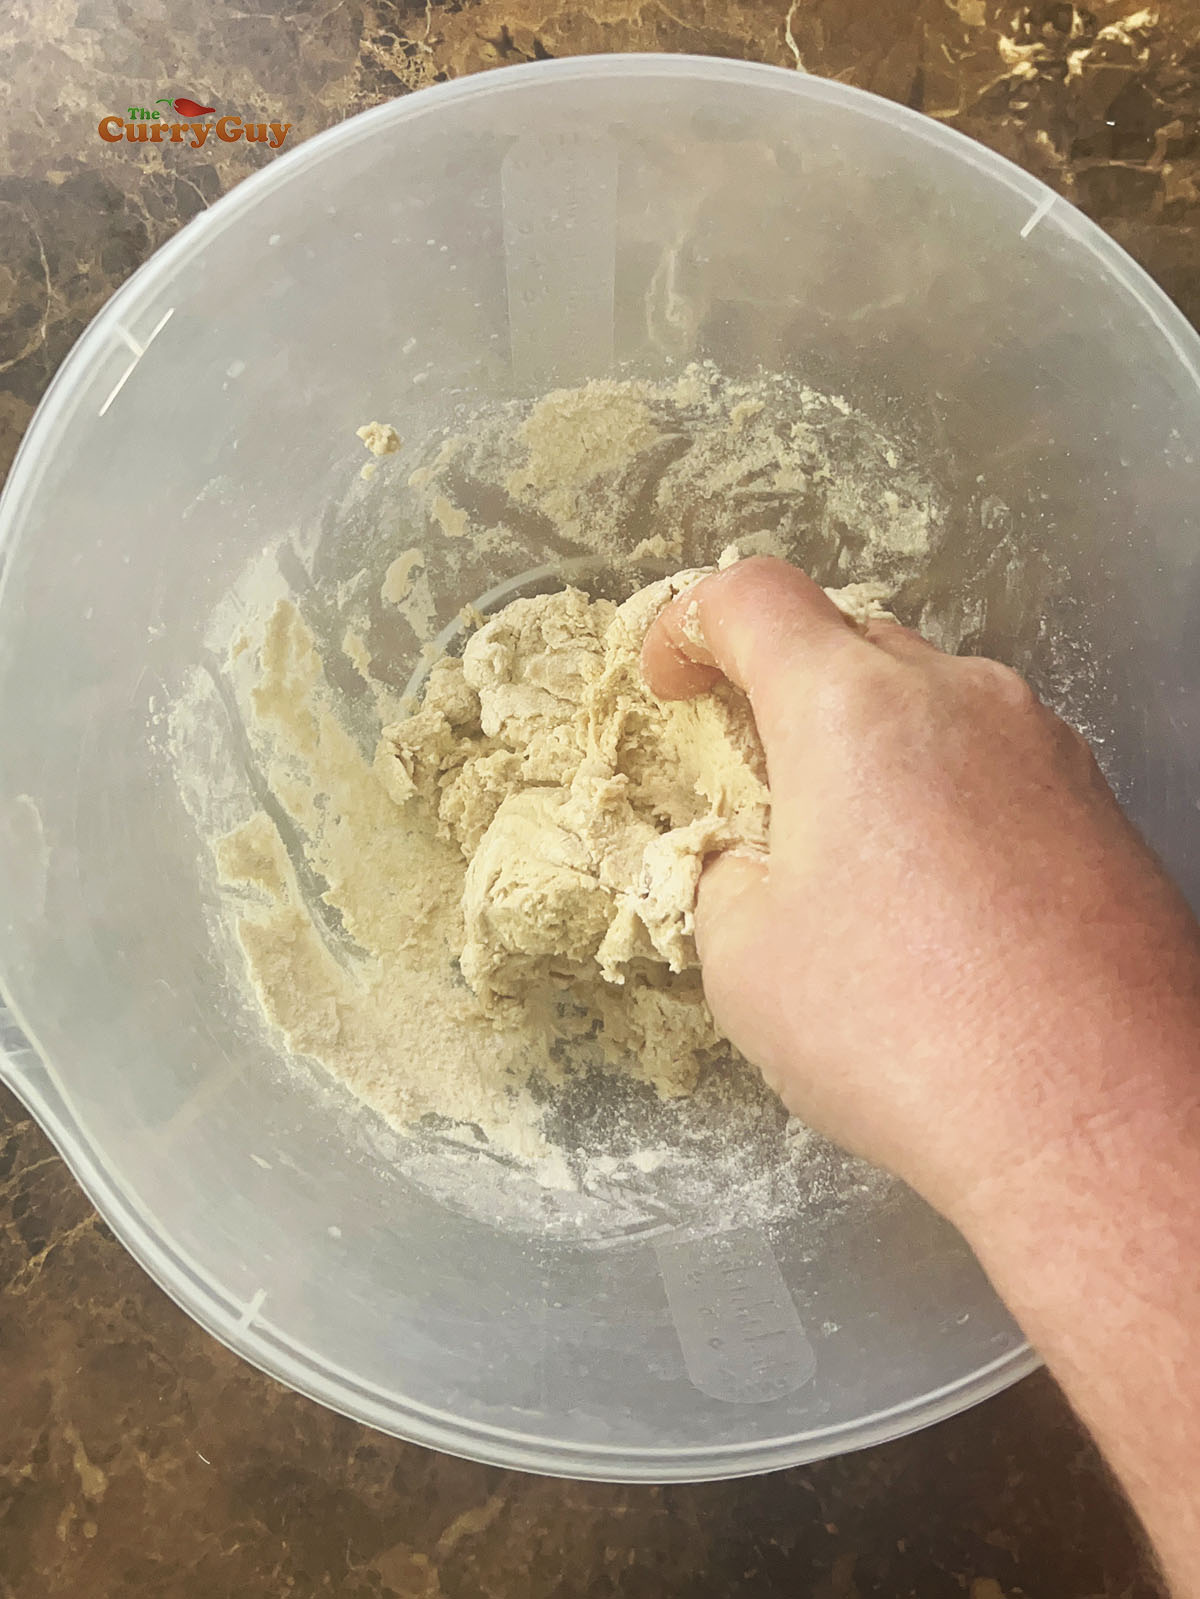 Continuing to slowly add water to form a dough.